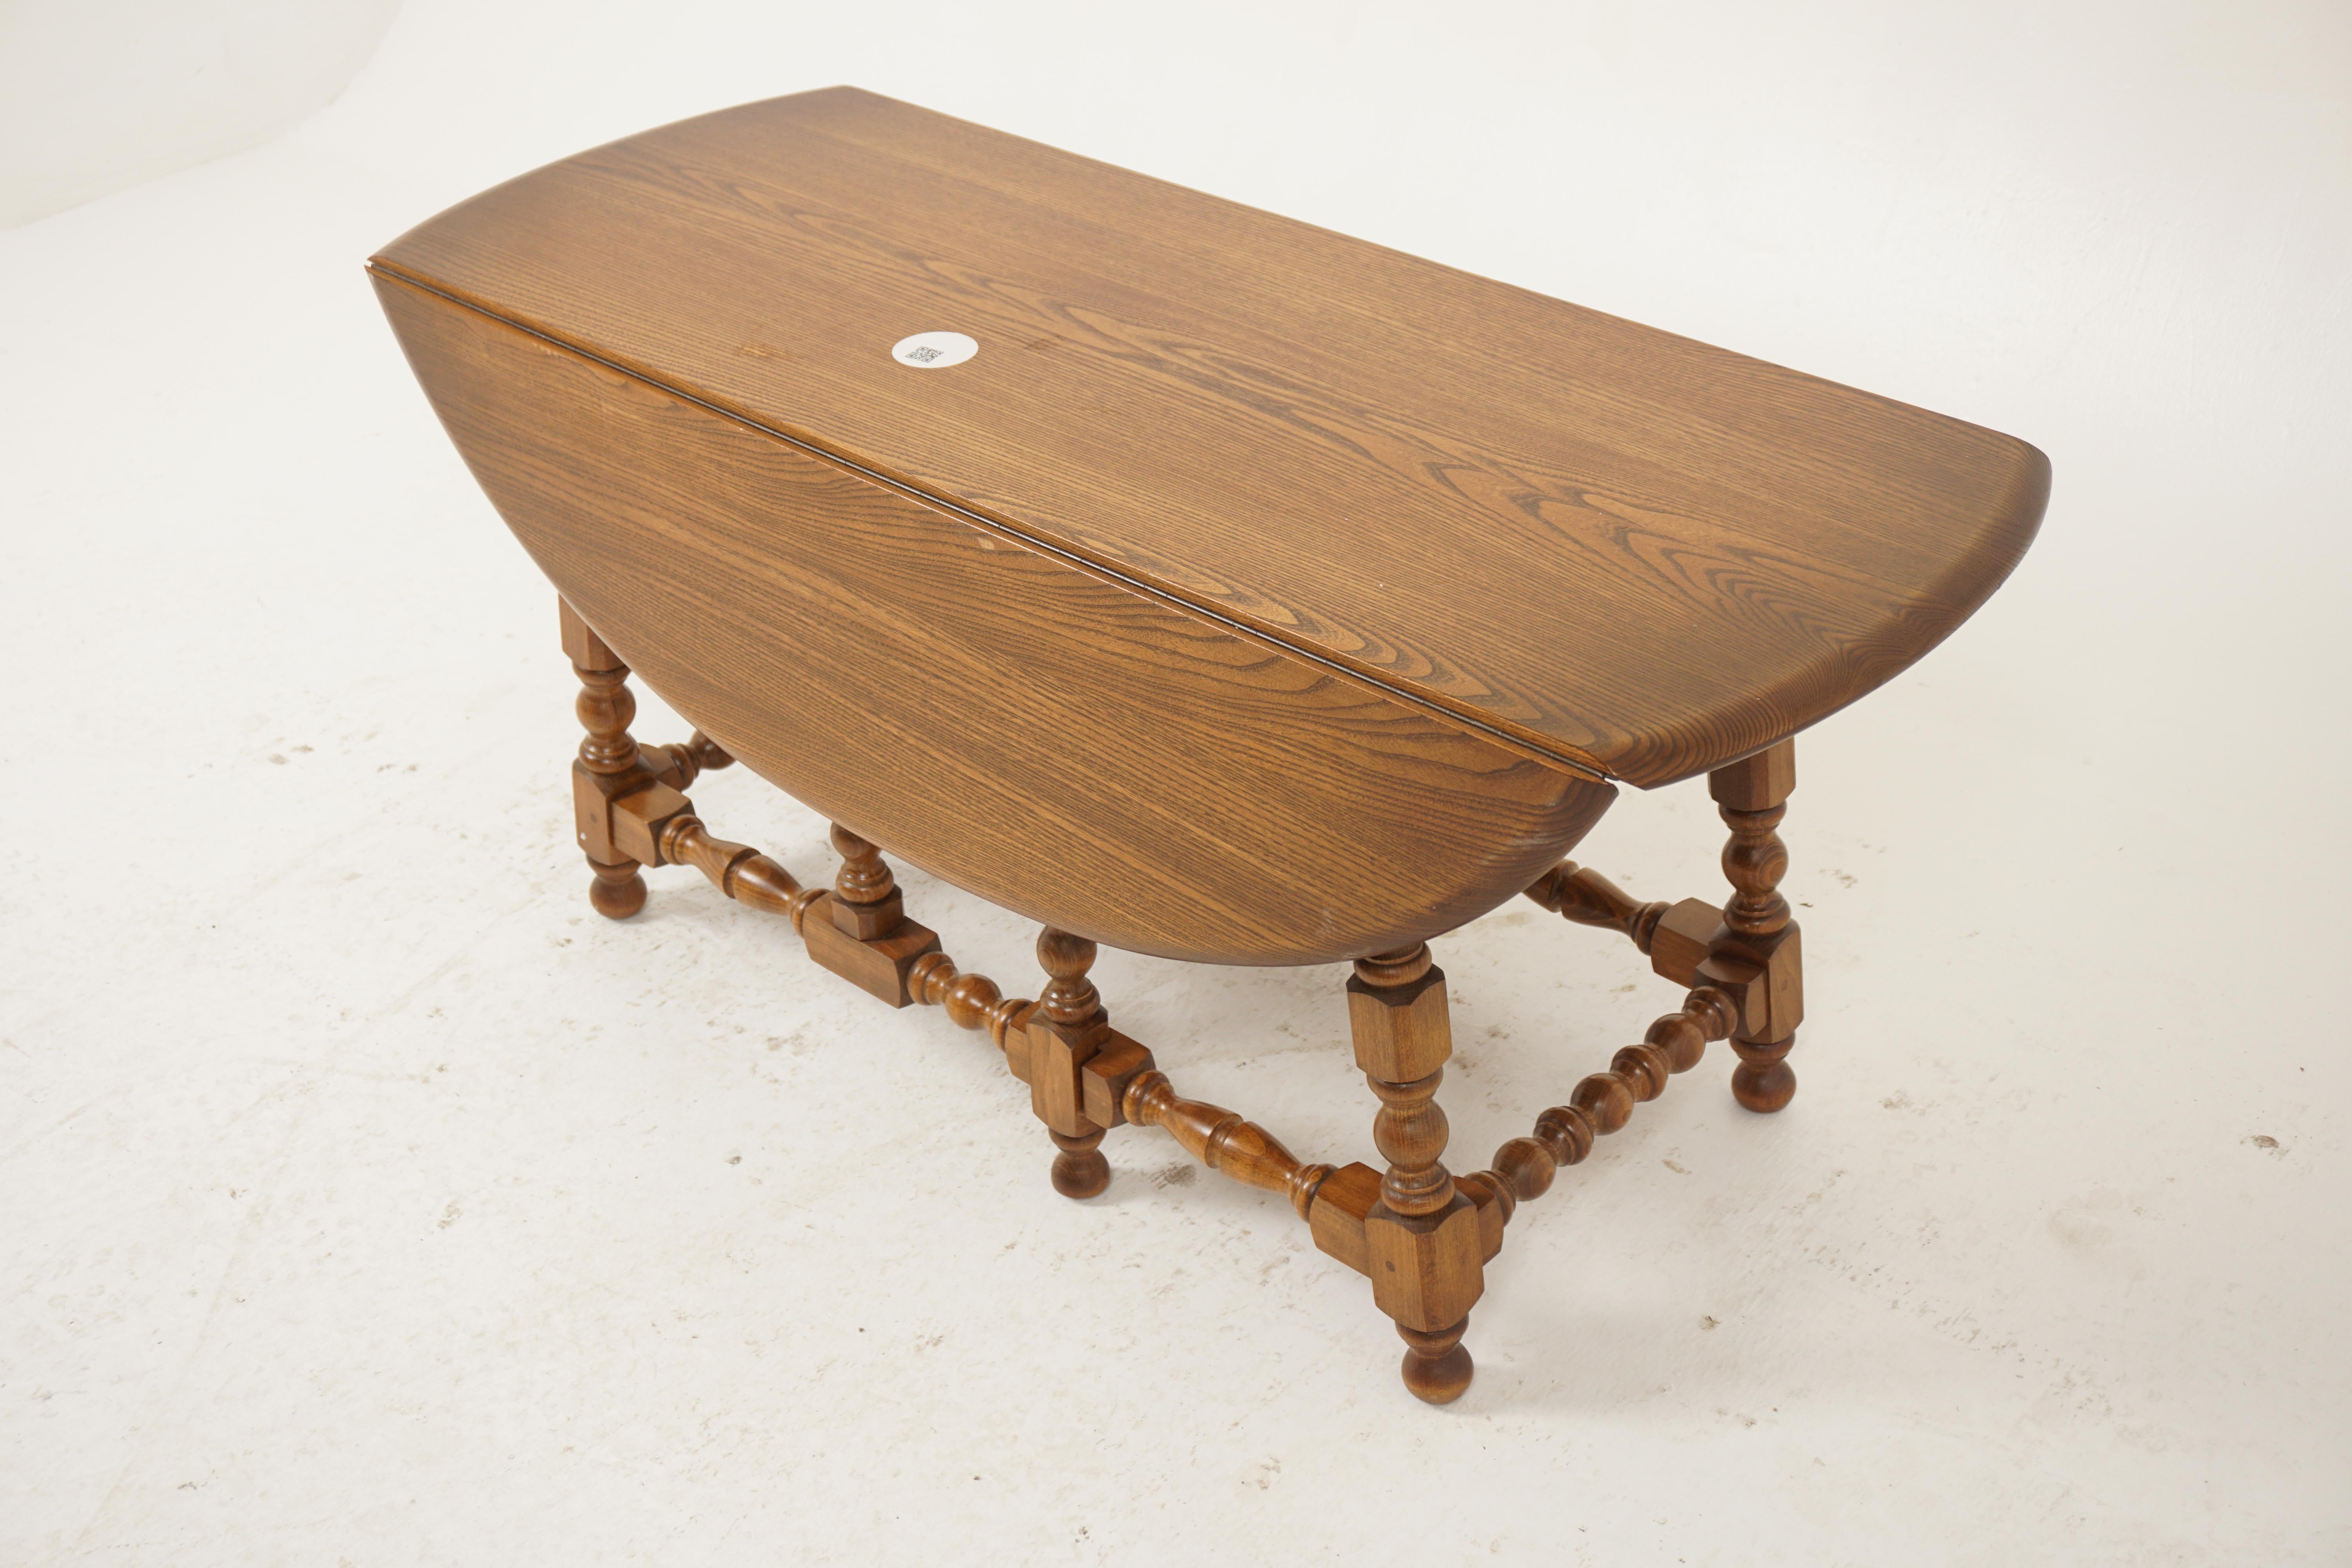 Vintage Ash Coffee Table, Drop Leaf, Gateleg, Scotland 1930, H1106

Scotland 1930s
Solid Ash
Original finish
Solid ash top with a pair of rounded leaves on the sides
All standing on six turned legs and connected by stretchers
Nice quality and in